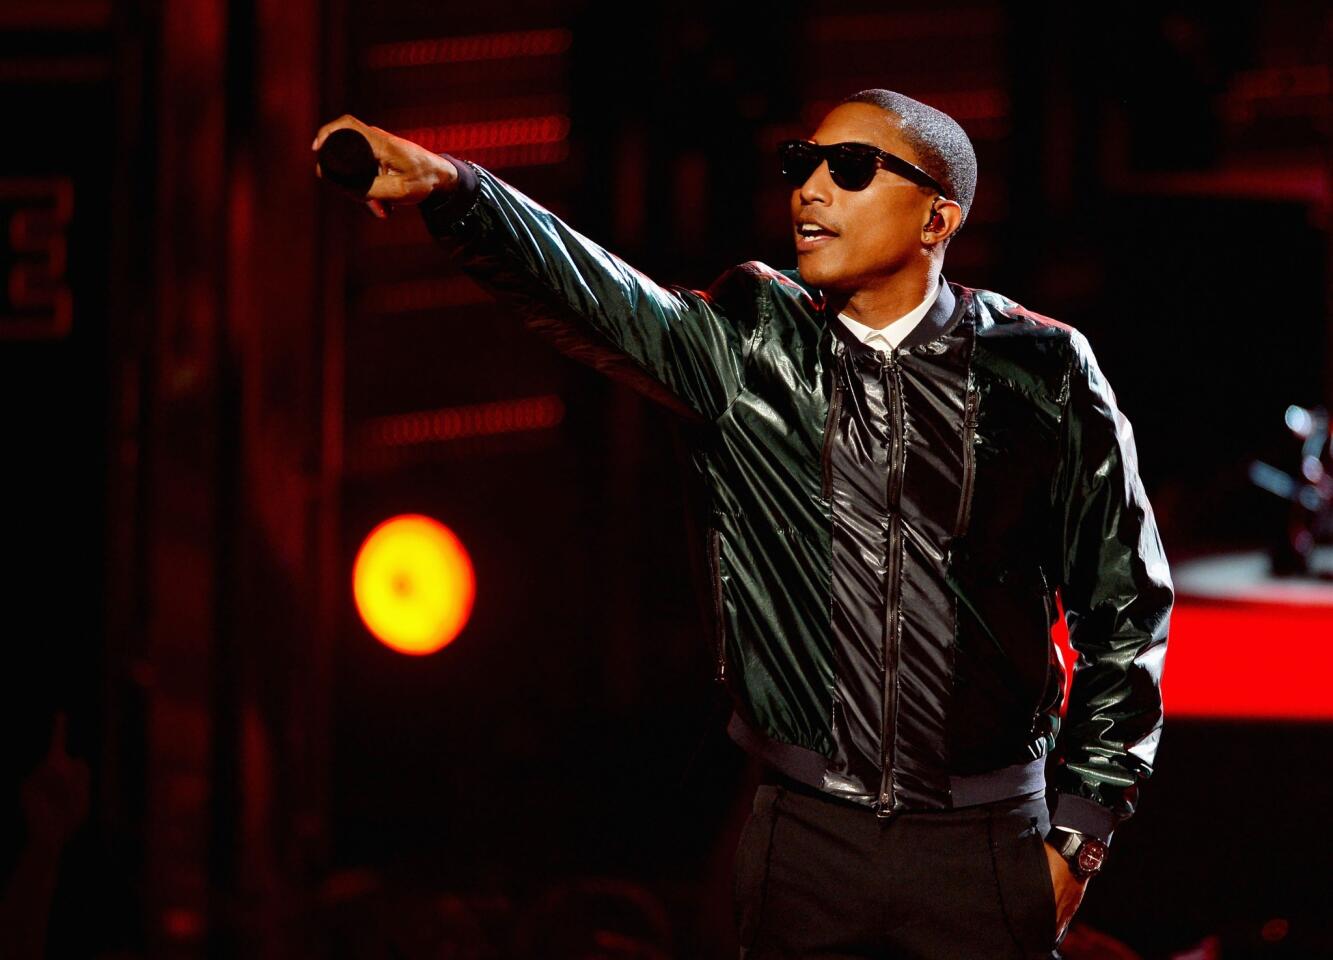 SWEET: Pharrell joins 'The Voice'